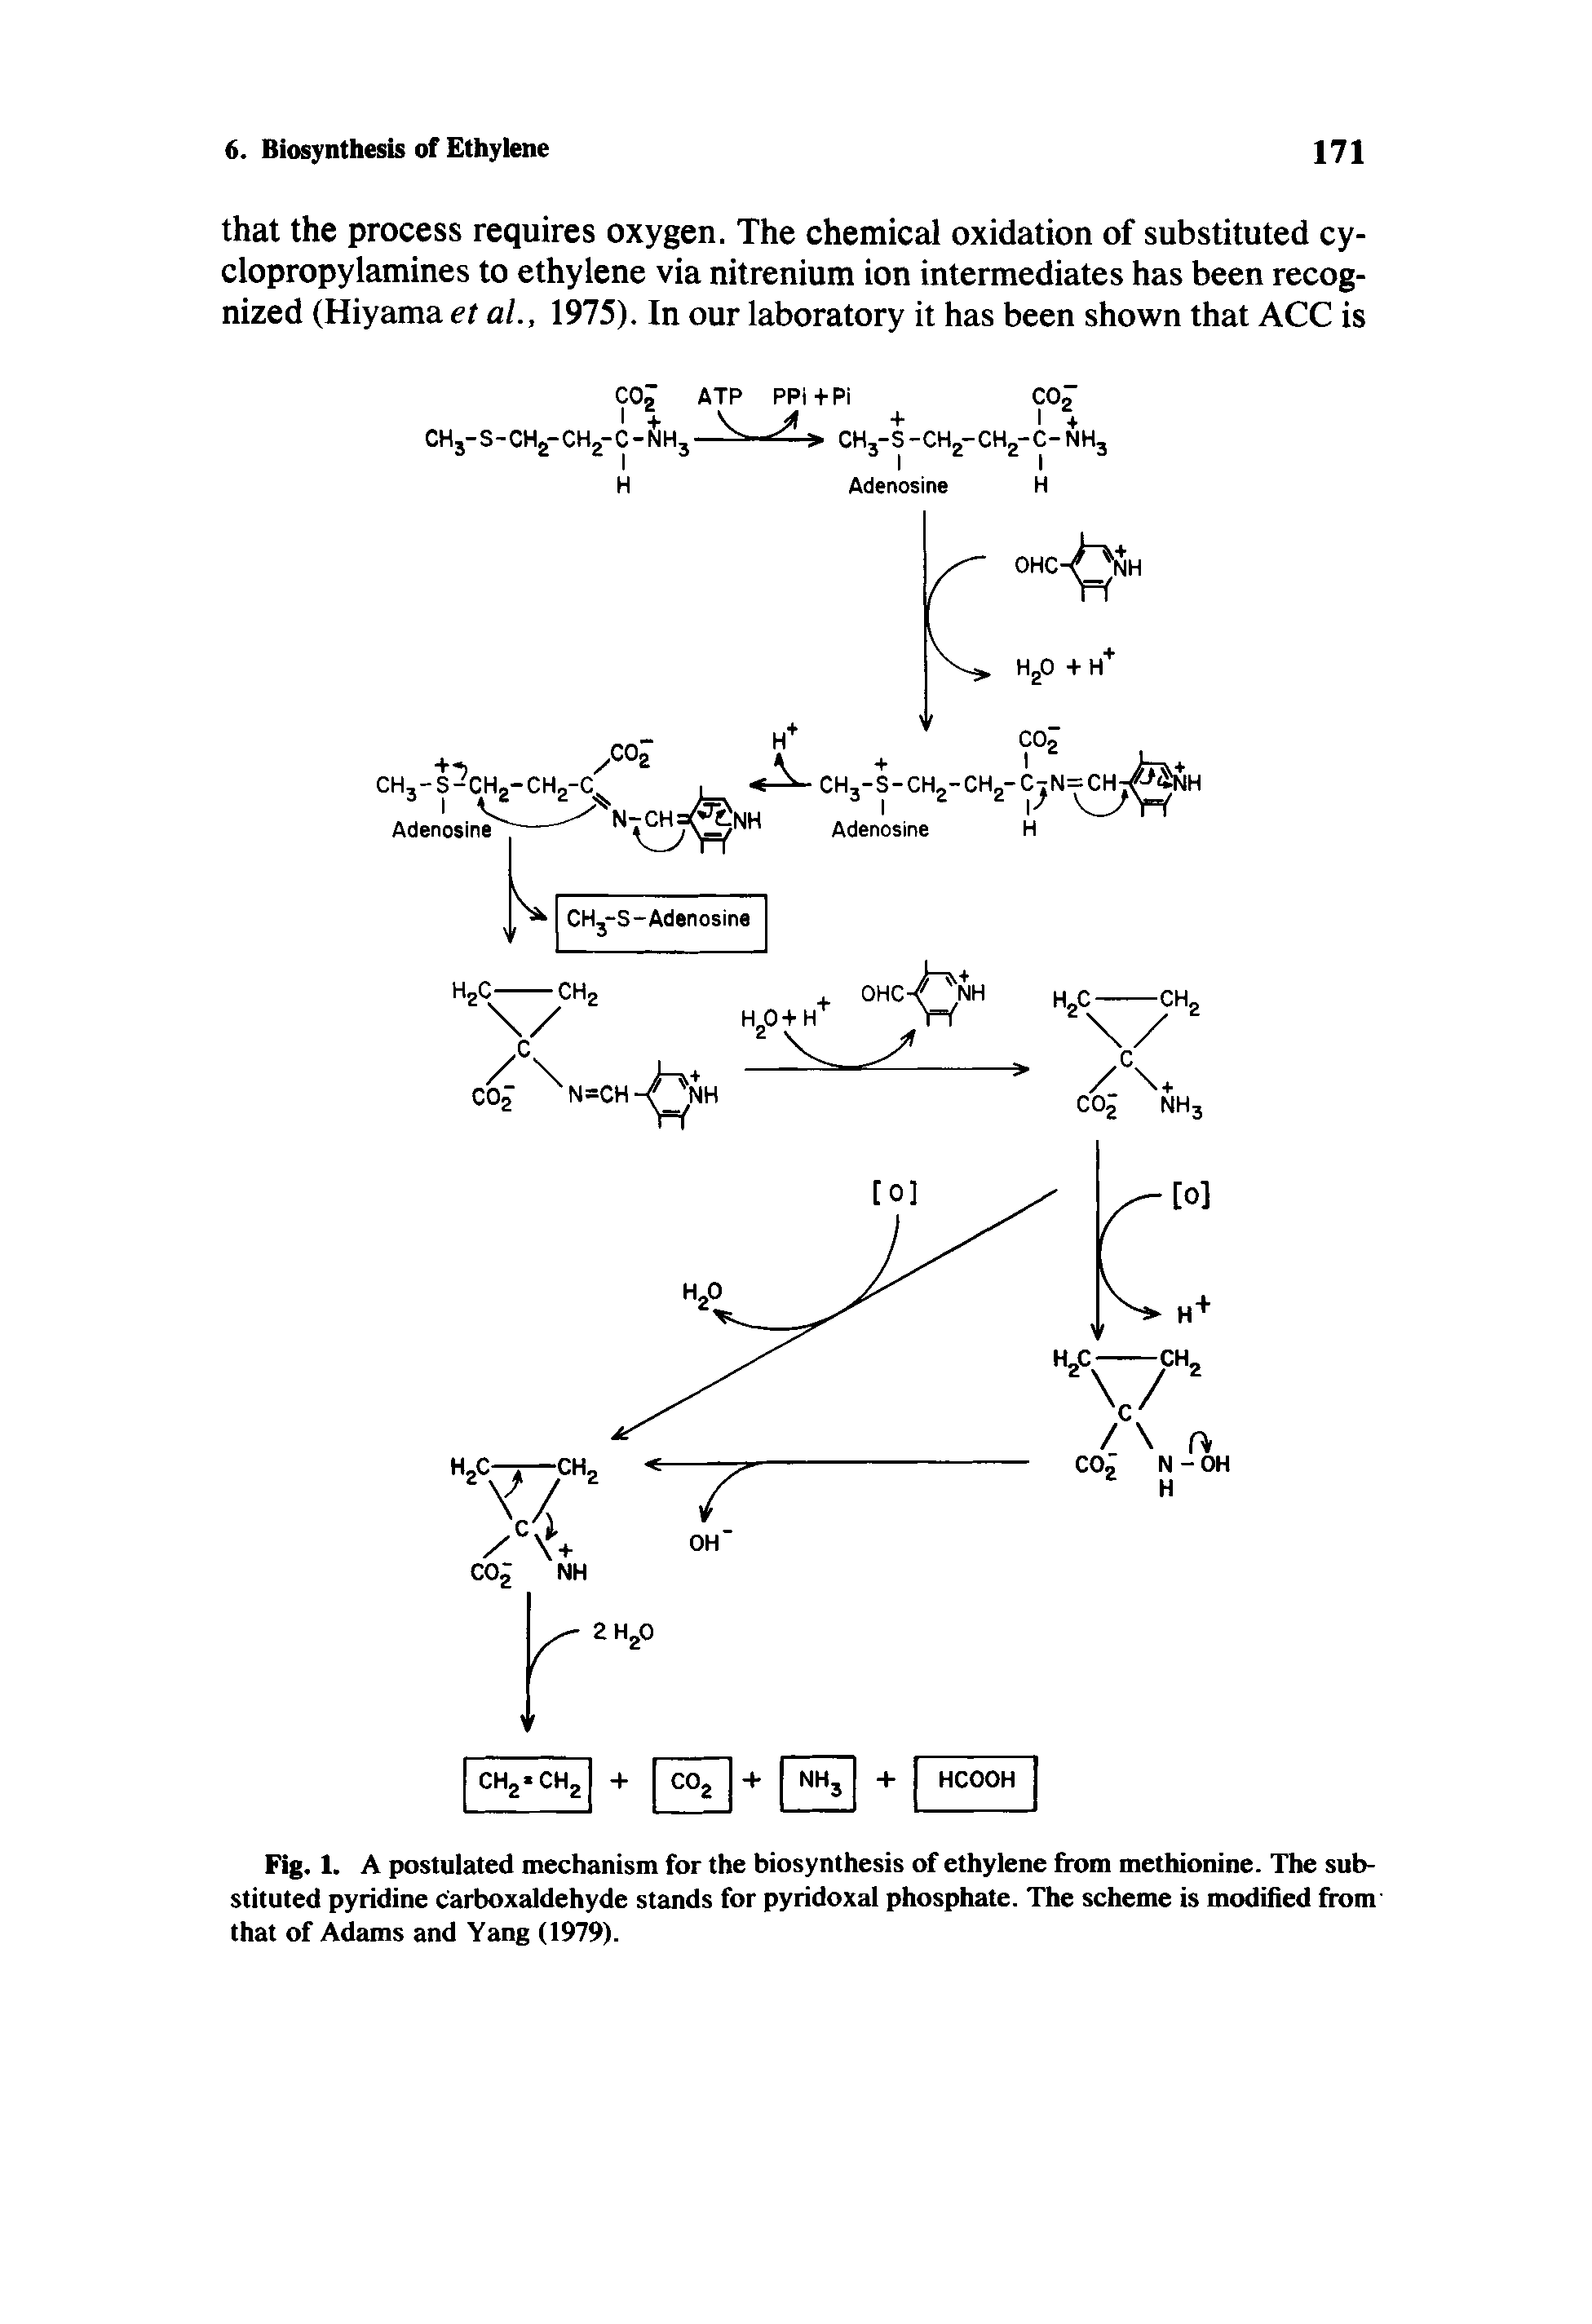 Fig. 1. A postulated mechanism for the biosynthesis of ethylene from methionine. The substituted pyridine c arboxaldehyde stands for pyridoxal phosphate. The scheme is modified from that of Adams and Yang (1979).